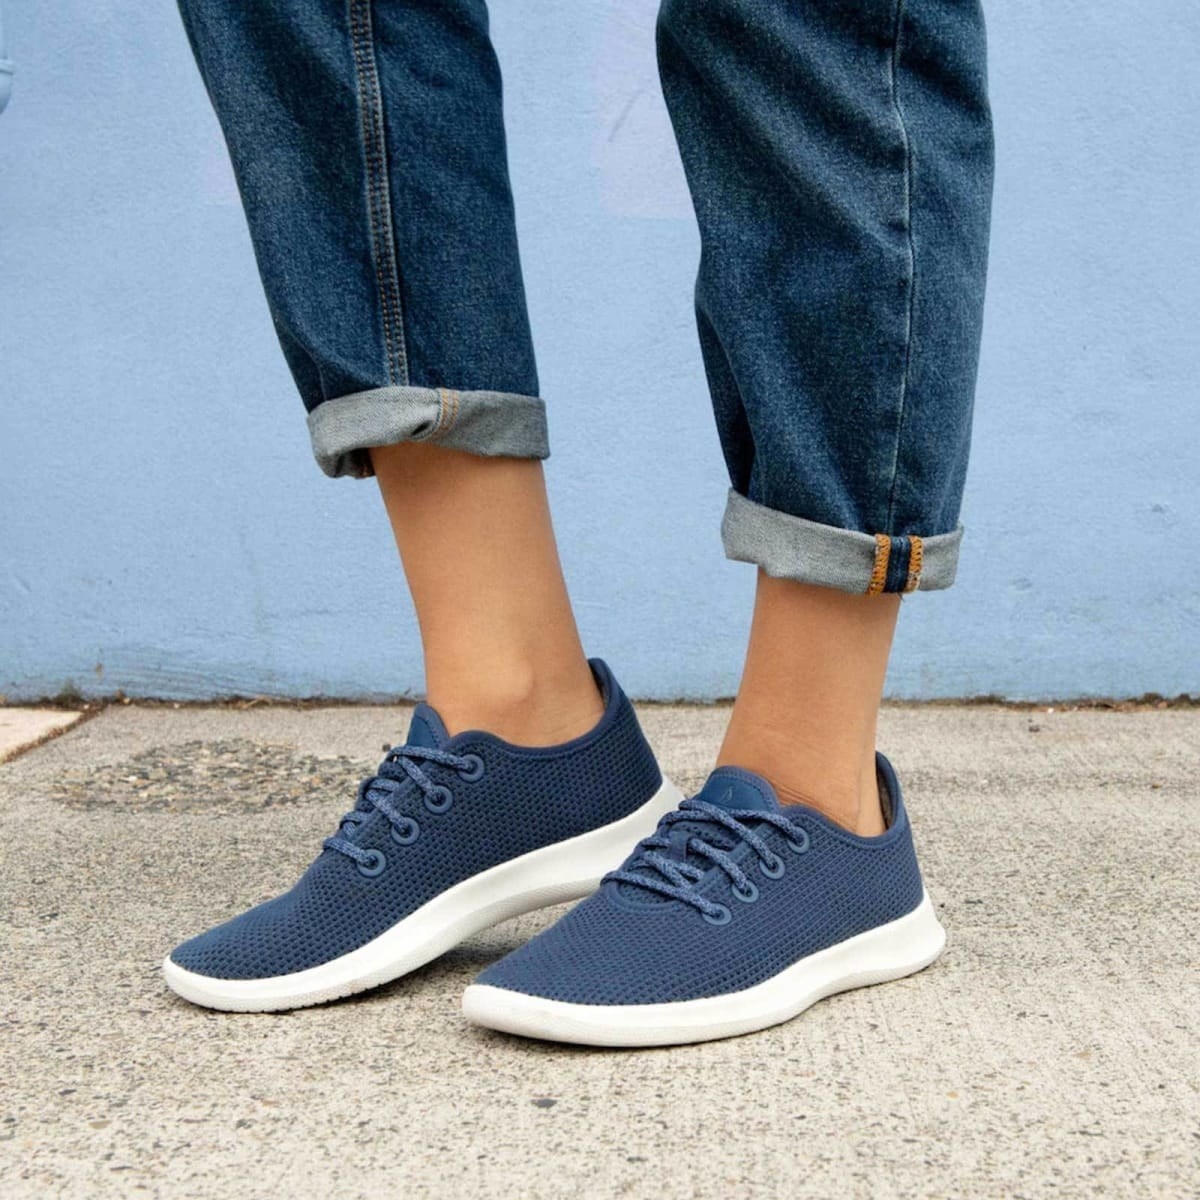 Model wearing the knit sneakers in blue with blue laces and white soles